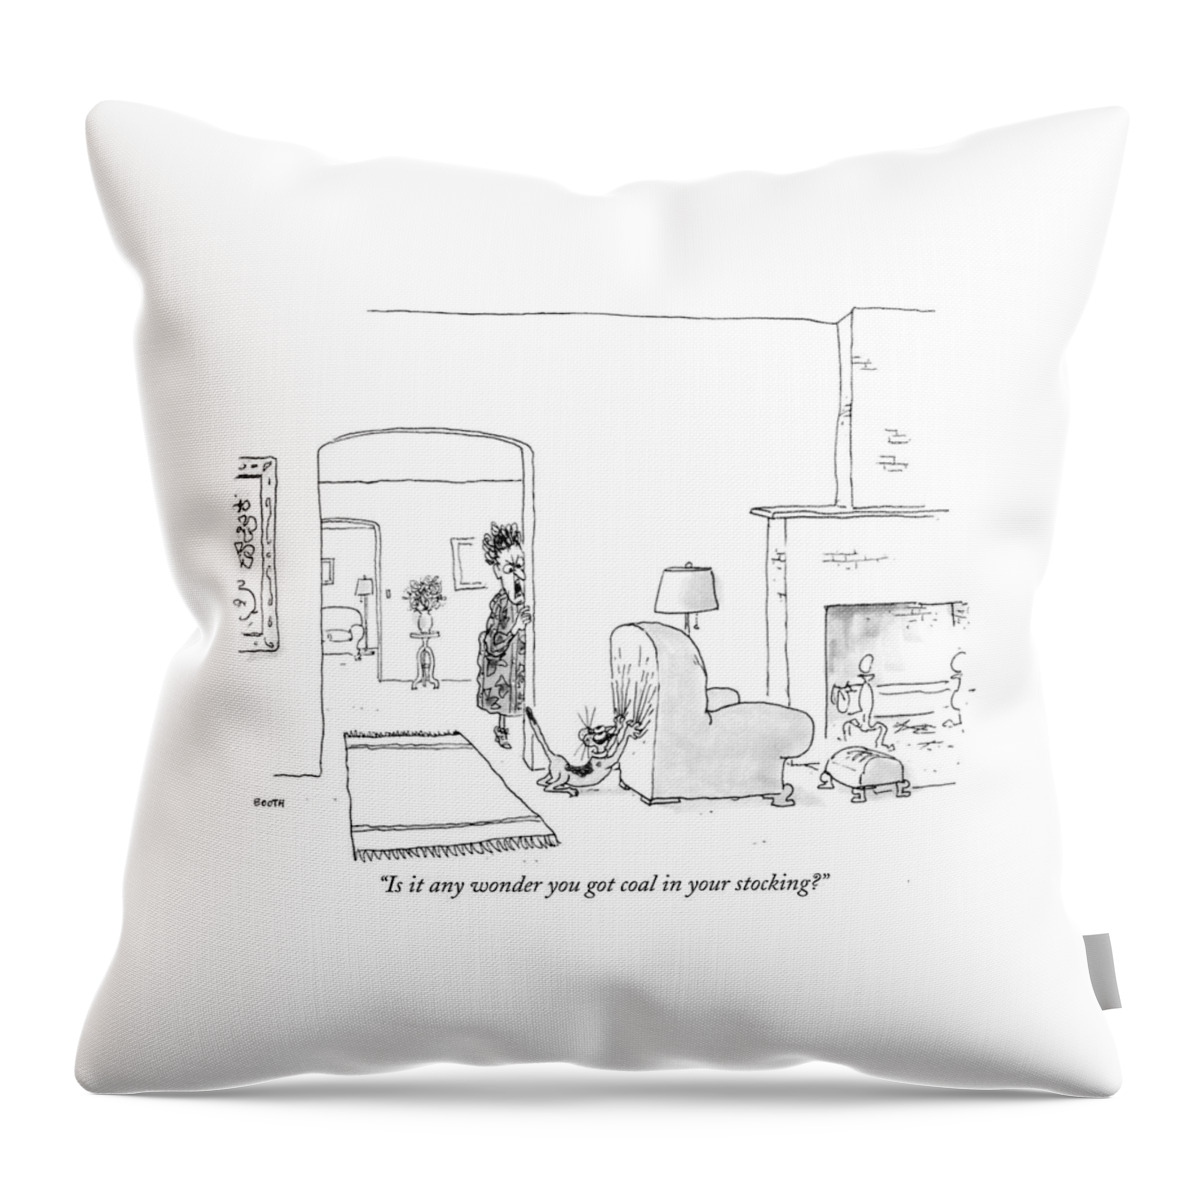 Is It Any Wonder You Got Coal In Your Stocking? Throw Pillow